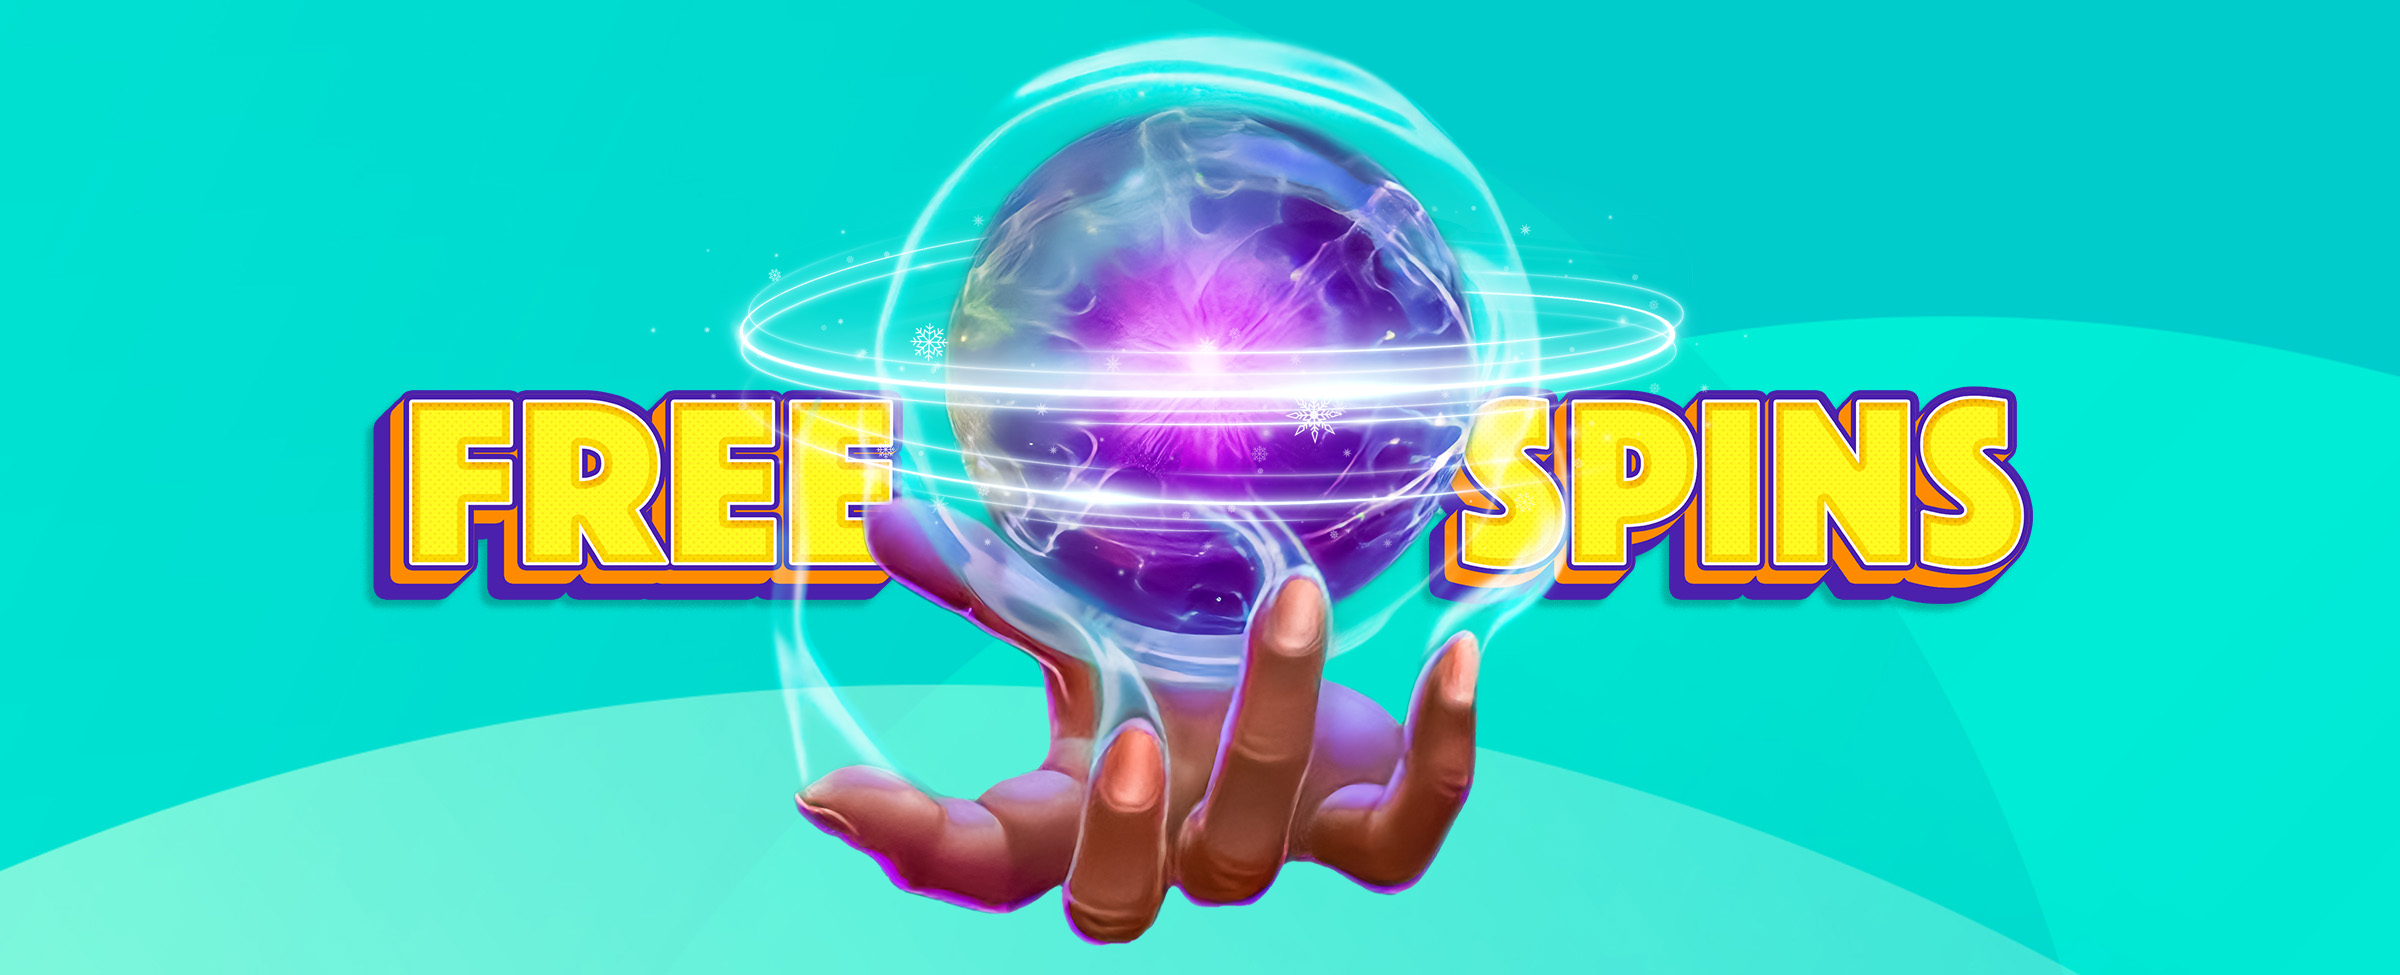 A 3D-animated hand with a magical purple and pink neon-colored glass ball hovering above it, with magic swooshes surrounding it. Either side are the words “free spins” in bold, yellow capital letters, set against a two-toned teal abstract background.